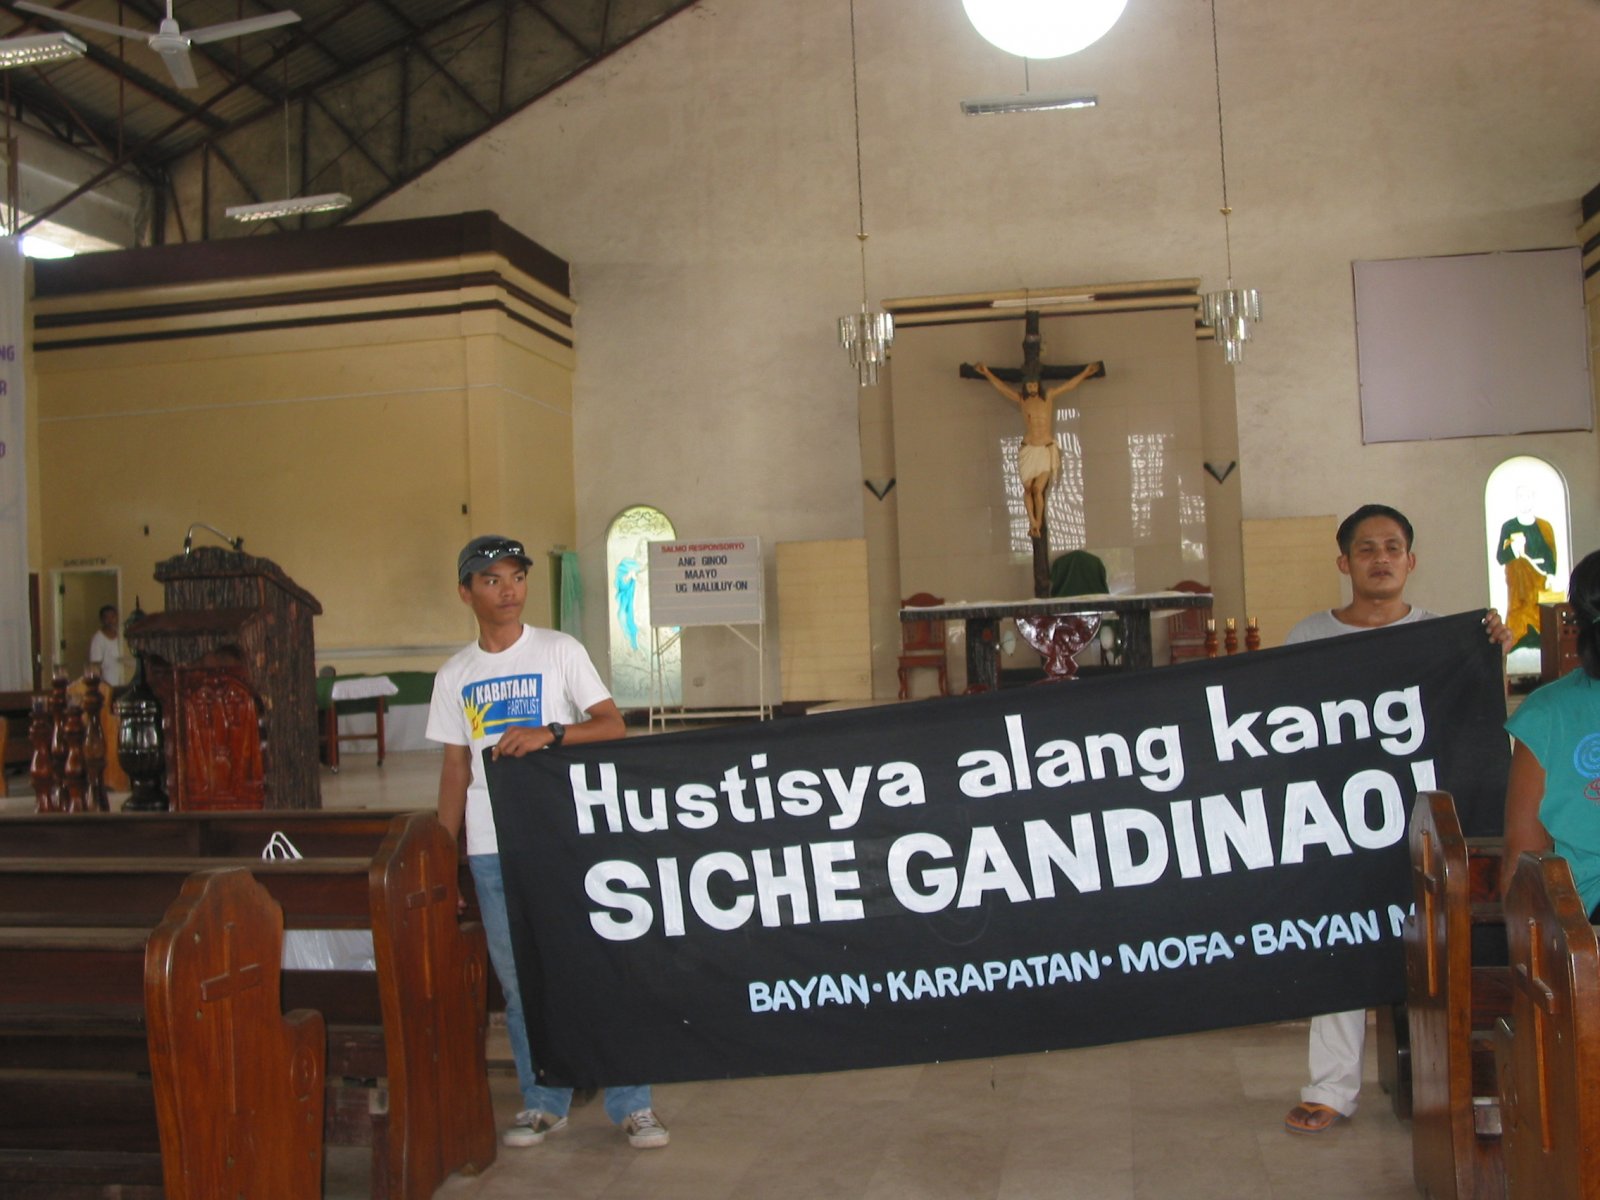 A banner was unfurled as the memorial service began. Photo by libudsuroy. Creative Commons.